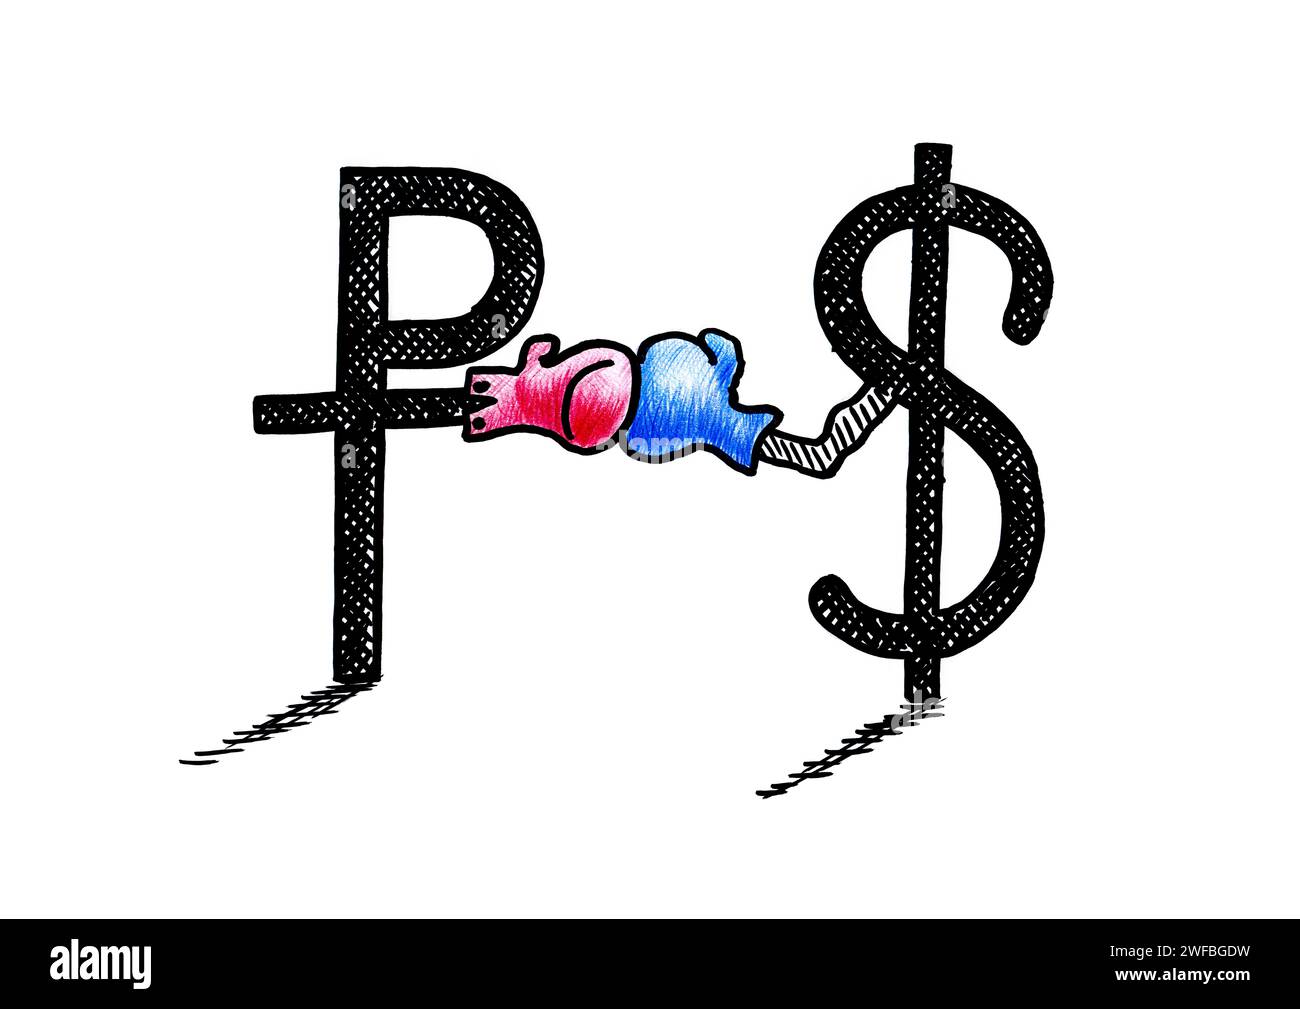 Hand drawn pen sketch of the Russian rouble sign boxing with the US dollar symbol. Business metaphor for parity, exchange value, forex, trade balance, Stock Photo